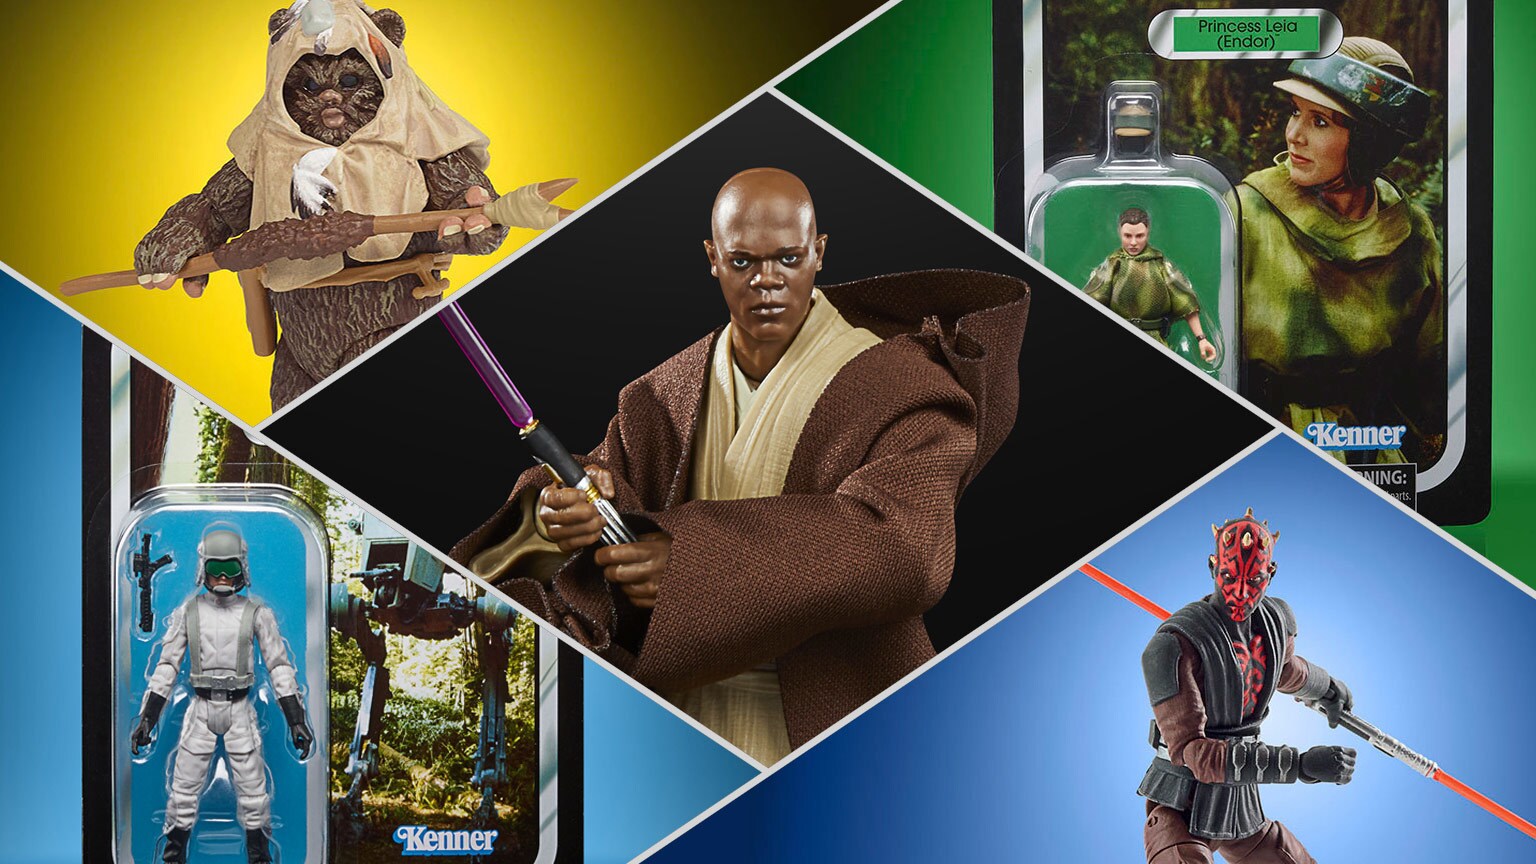 The Best Star Wars Toys and Action Figures to Buy in 2023 - IGN